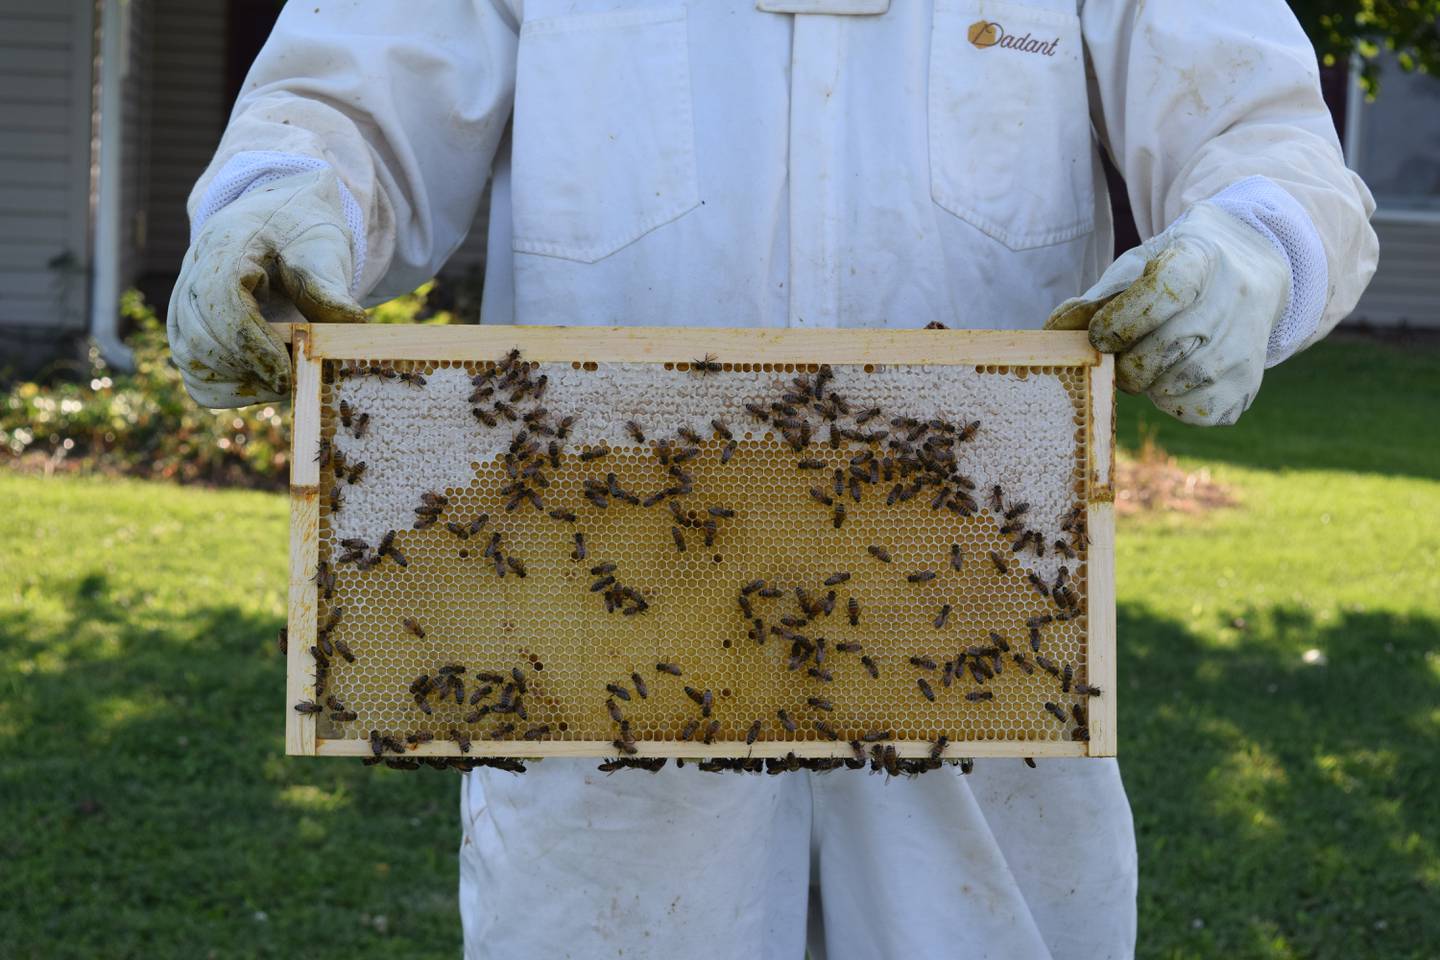 Mark Brummett is a beekeeper in Whiteland, Indiana. Over the past decade, he’s faced challenges in keeping hives alive and thriving — ranging from mites to hive damage due to pesticides. Indiana honey production for 2022 totaled 567,000 pounds, up 9% from 2021, according to the U.S. Department of Agriculture. Yields from Indiana’s 9,000 honey-producing colonies averaged 63 pounds in 2022, up 11 pounds from the previous year.